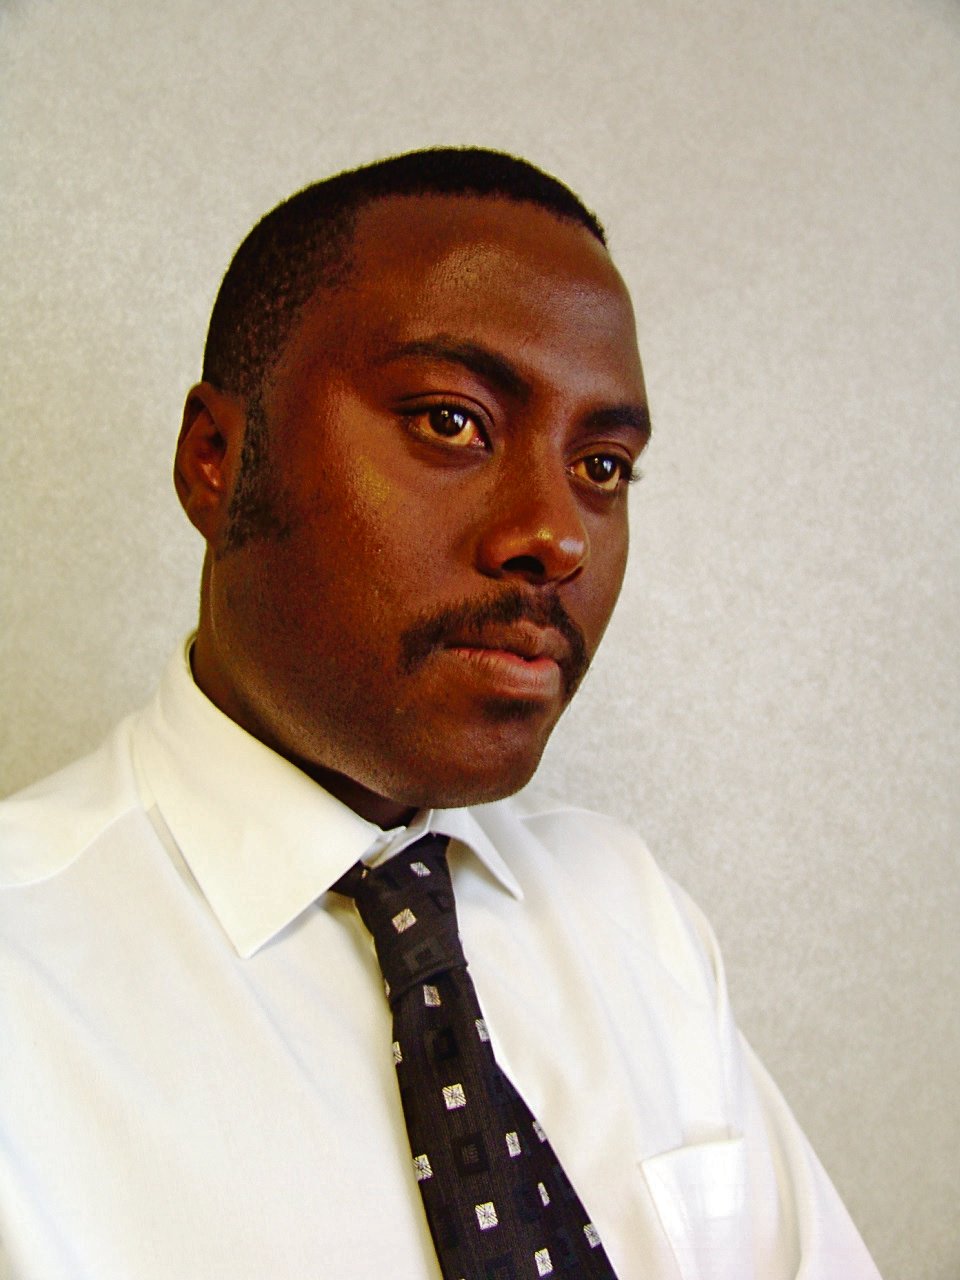 Clayson Monyela, spokesperson for the international relations and cooperation department